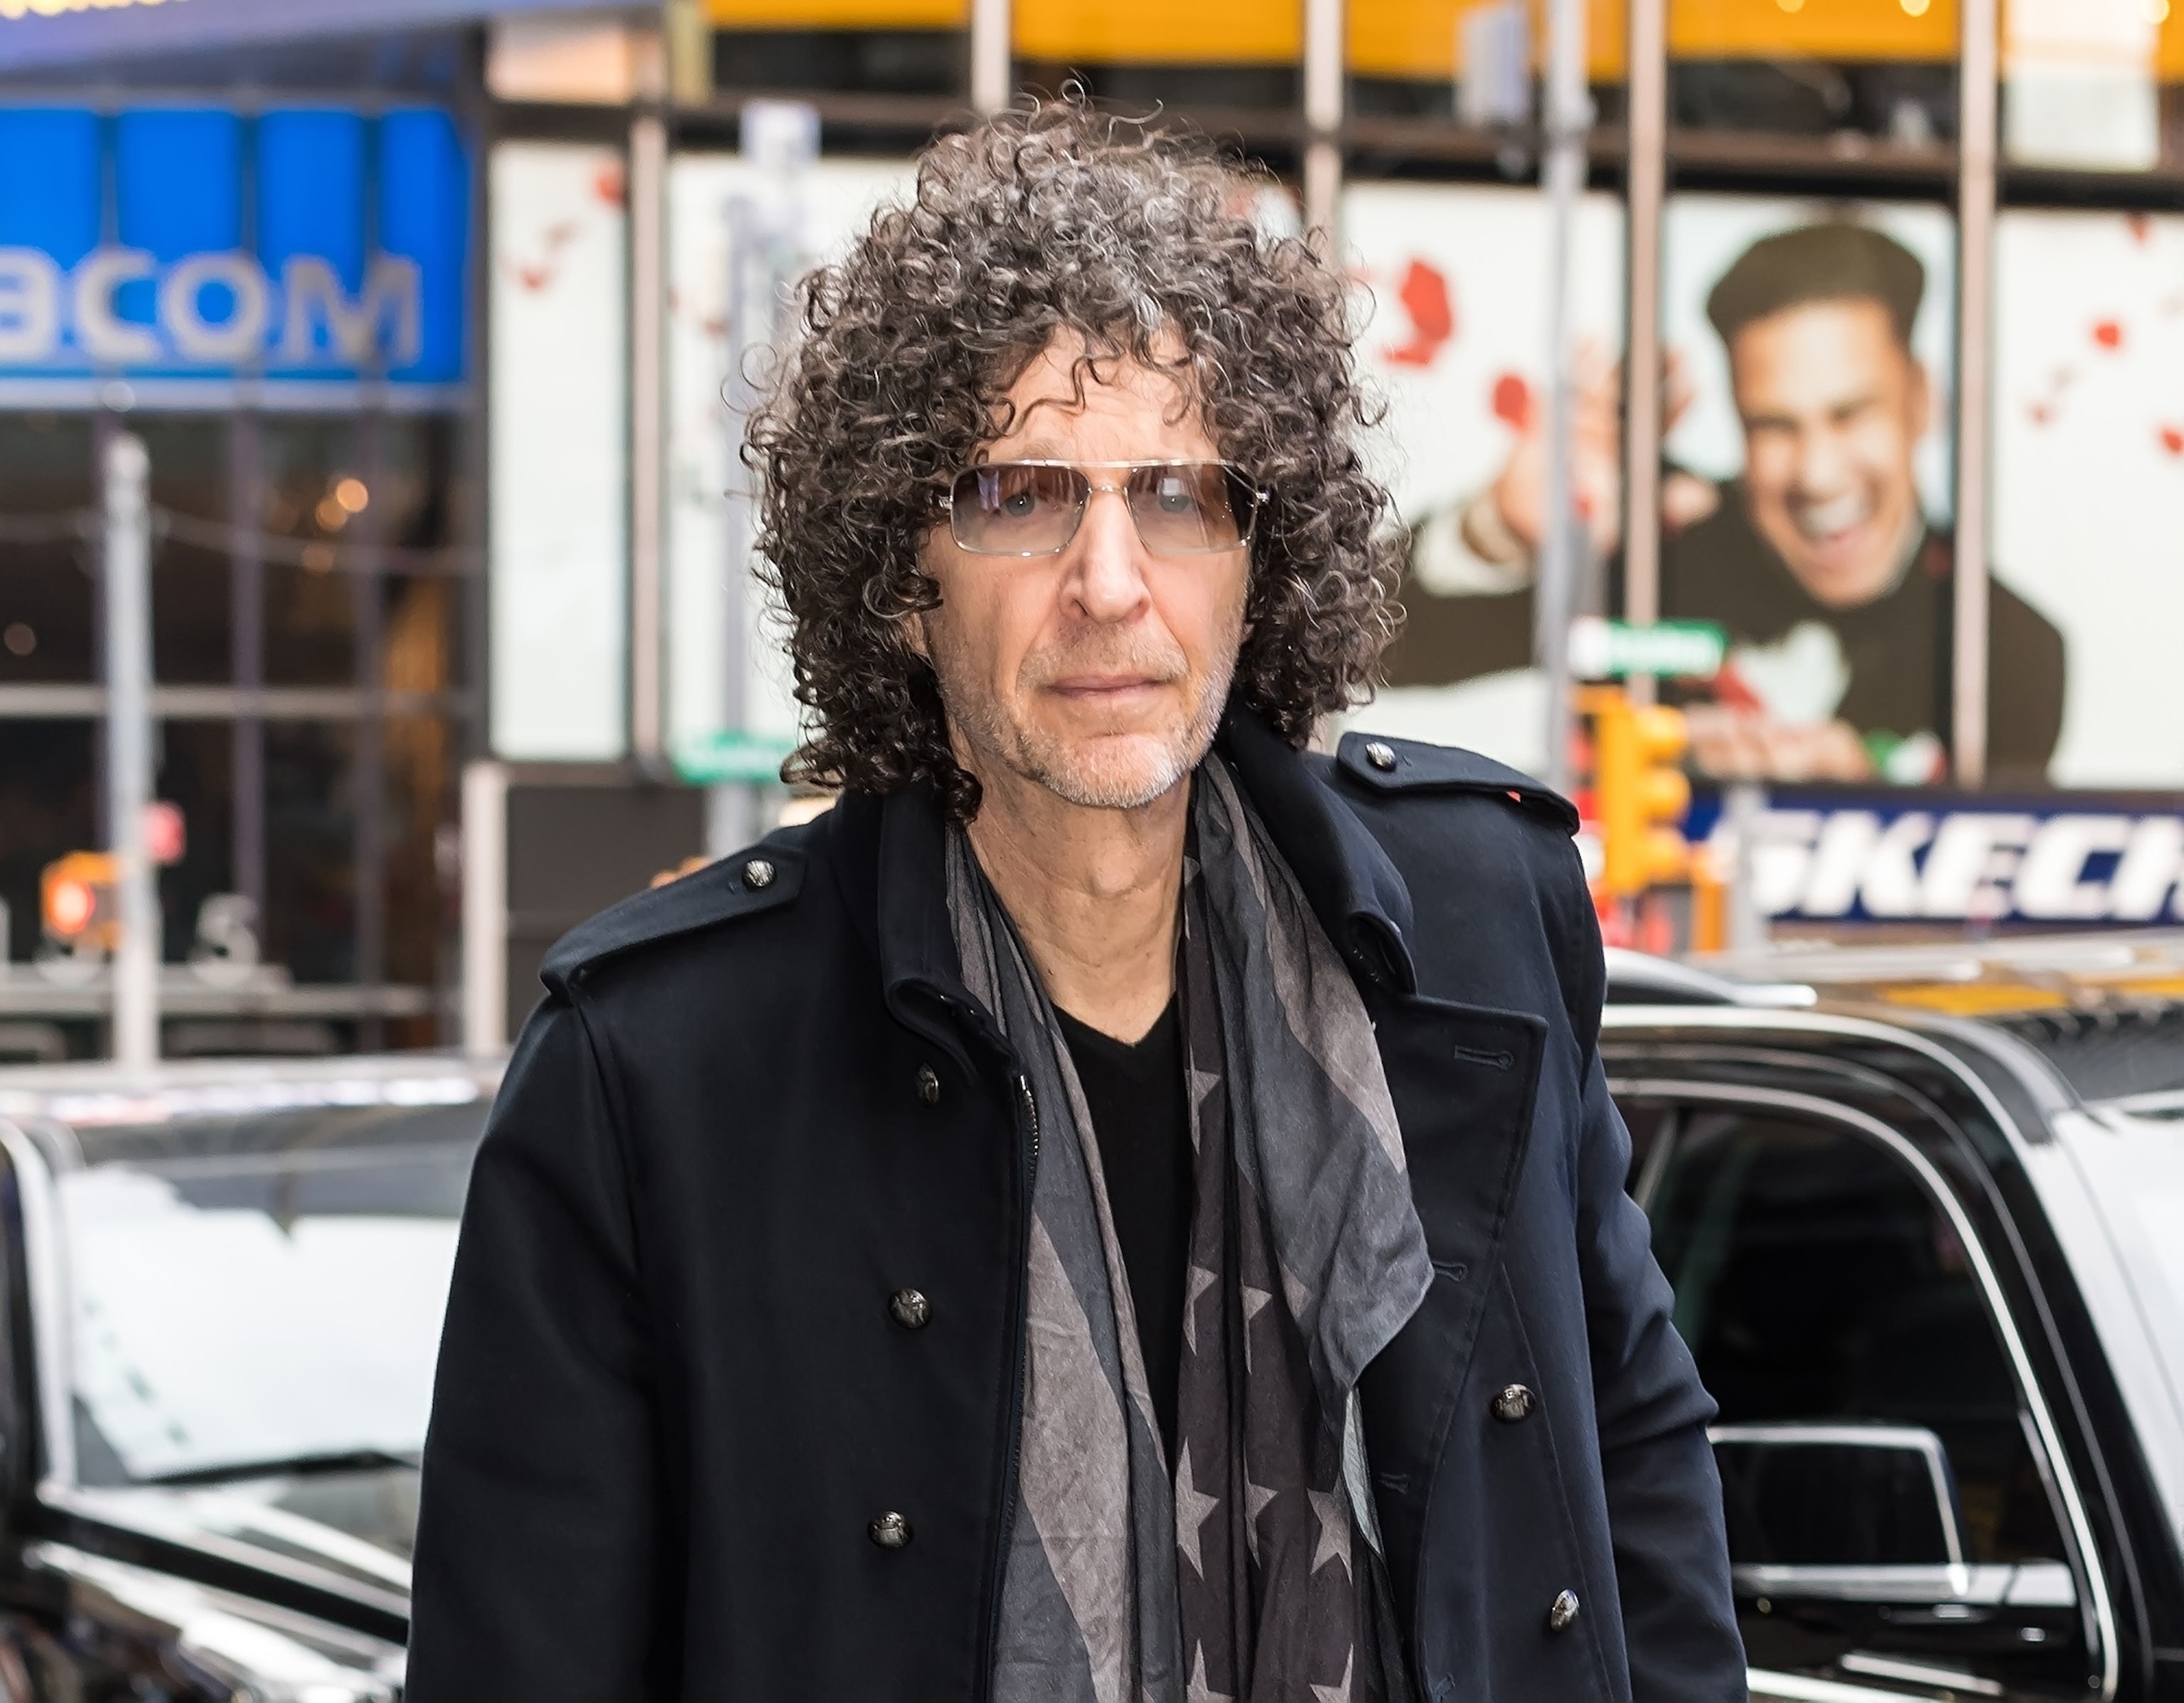 PHOTO: Howard Stern is seen arriving to the ABC studio for GMA, May 9, 2019, in New York.